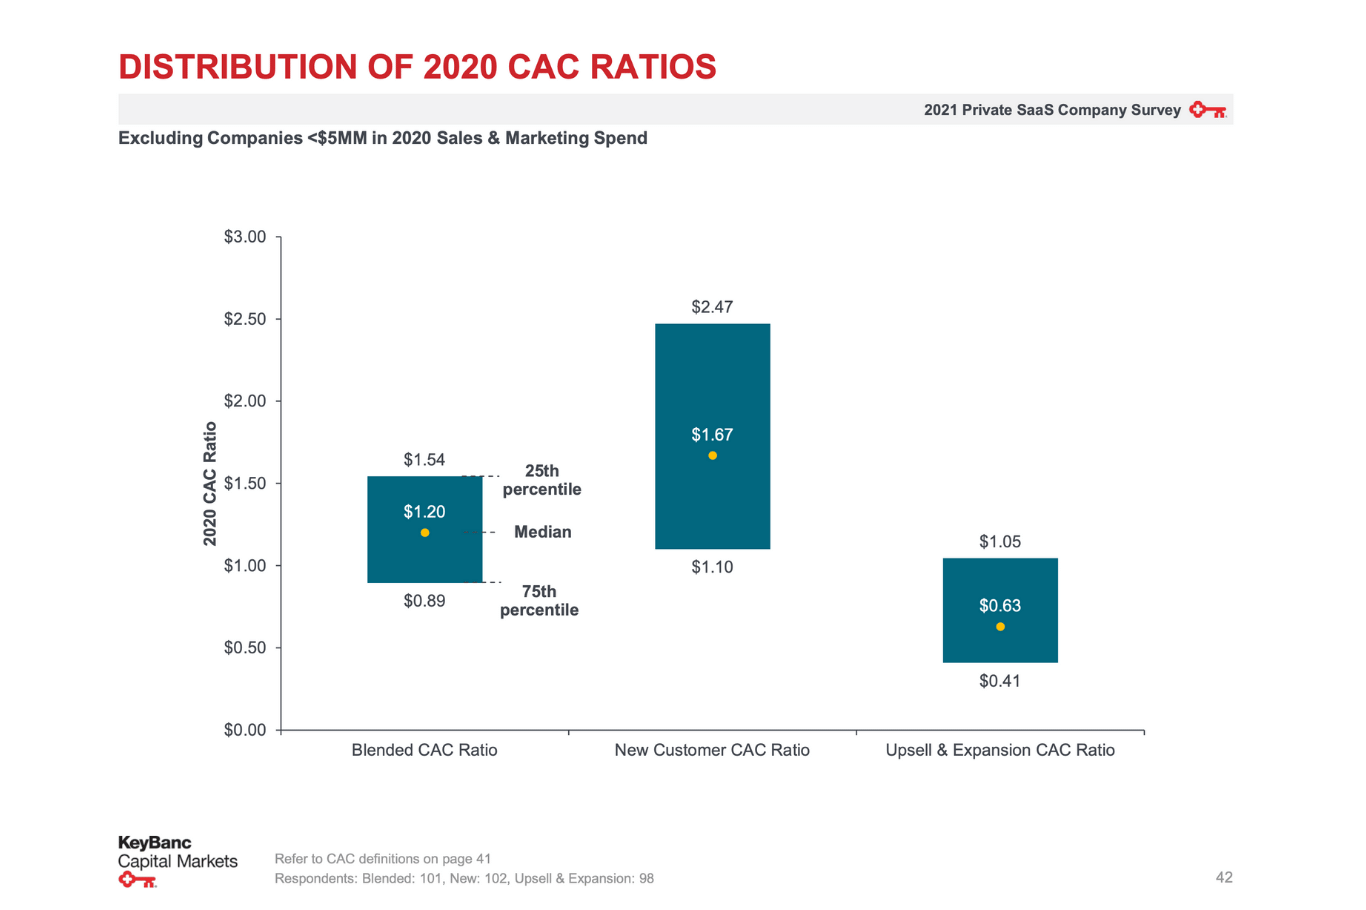 Distribution of 2020 CAC Ratios